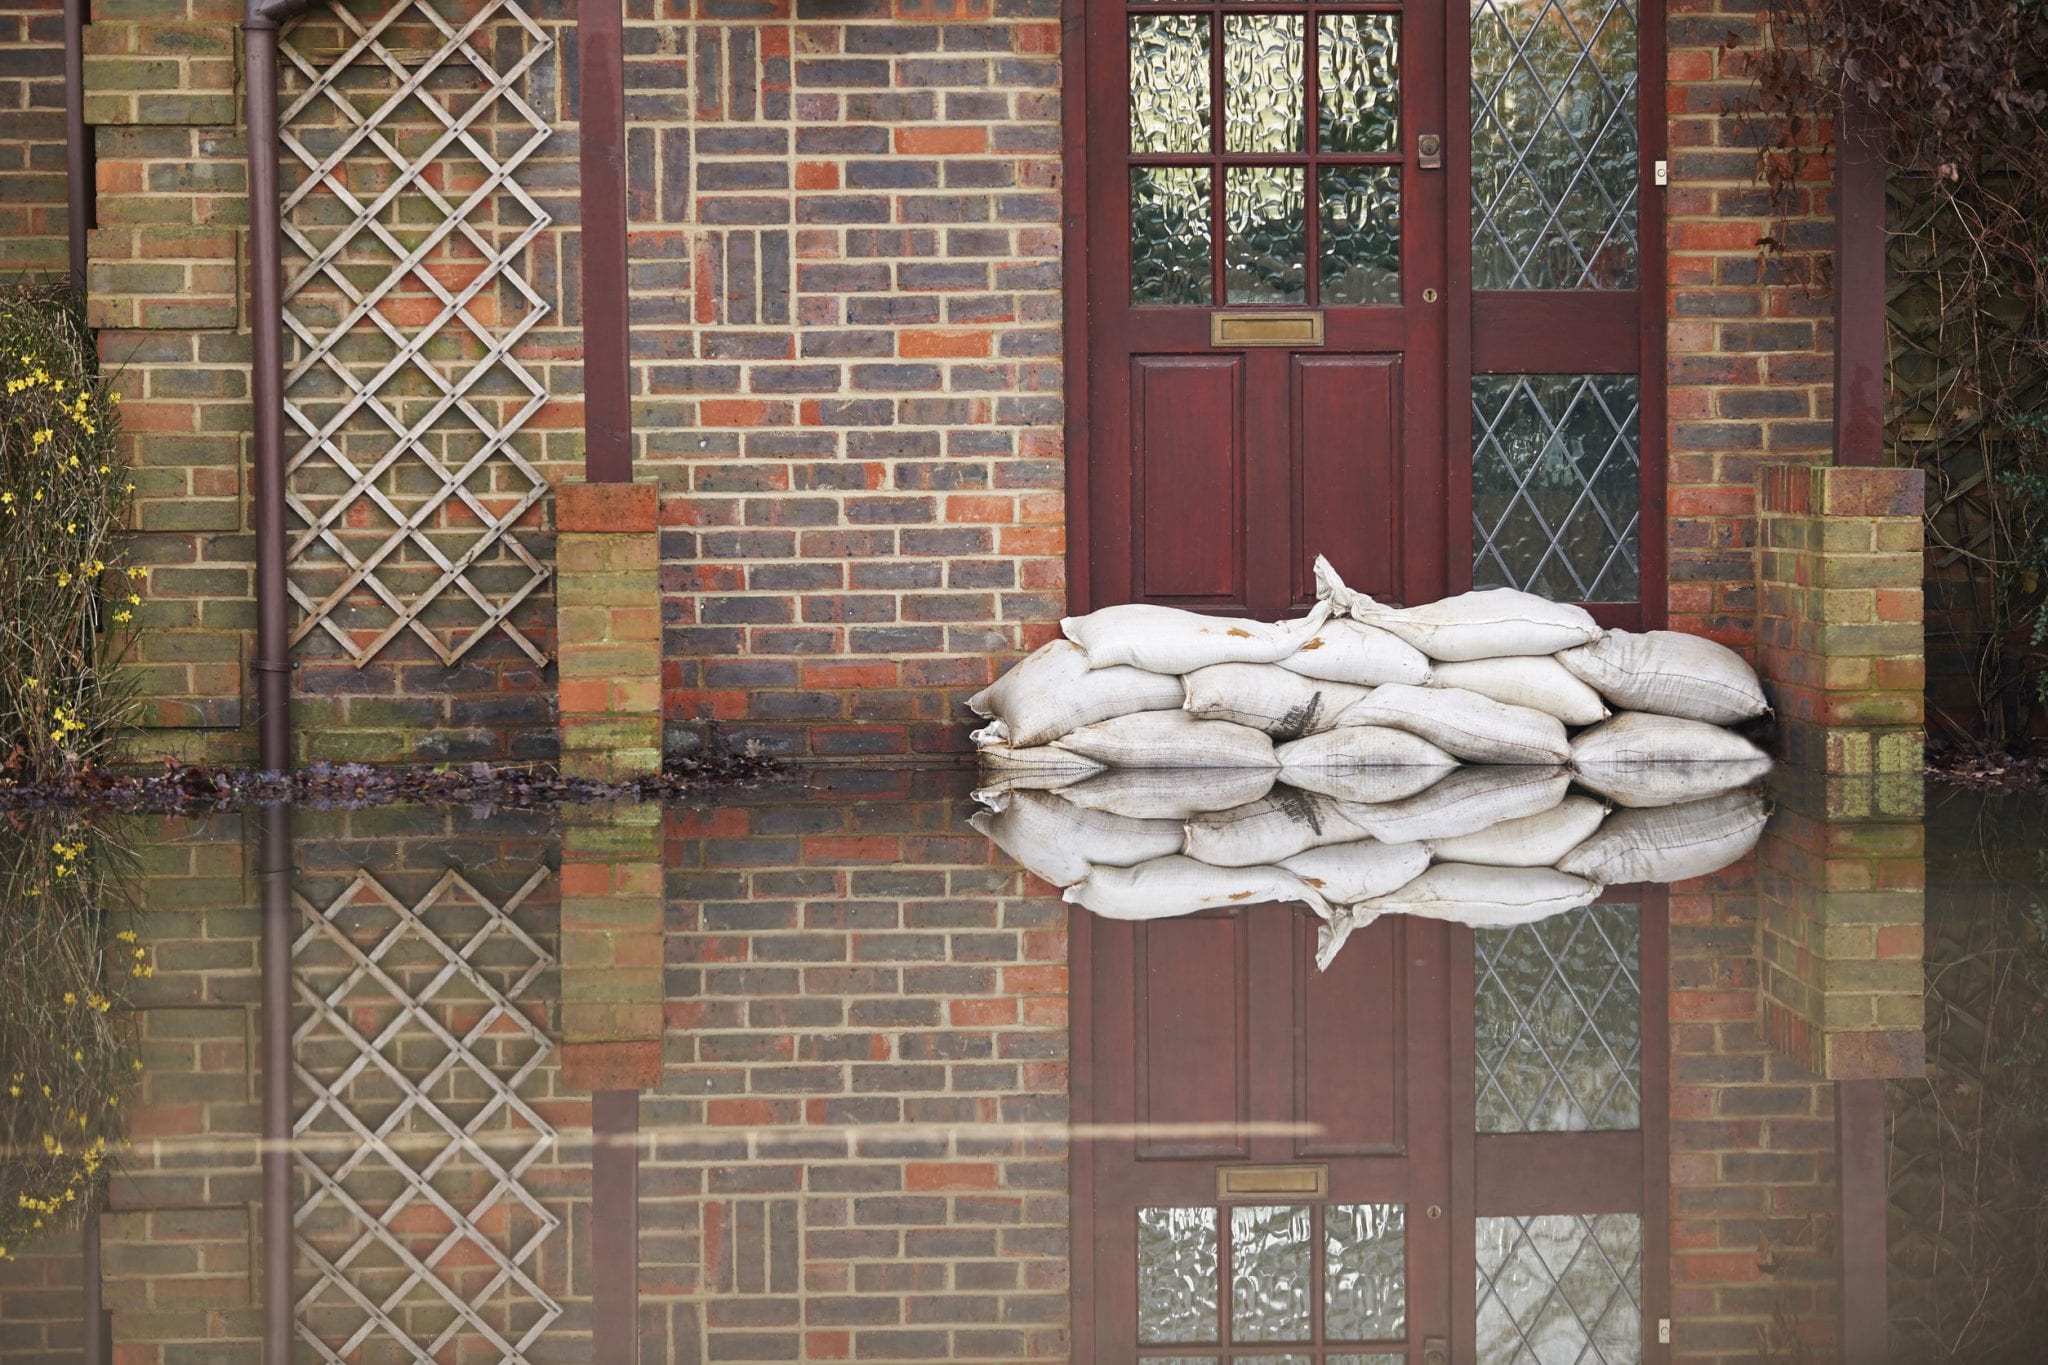 Sand bags piled up in front of a front door to a brick home, with water on the ground.